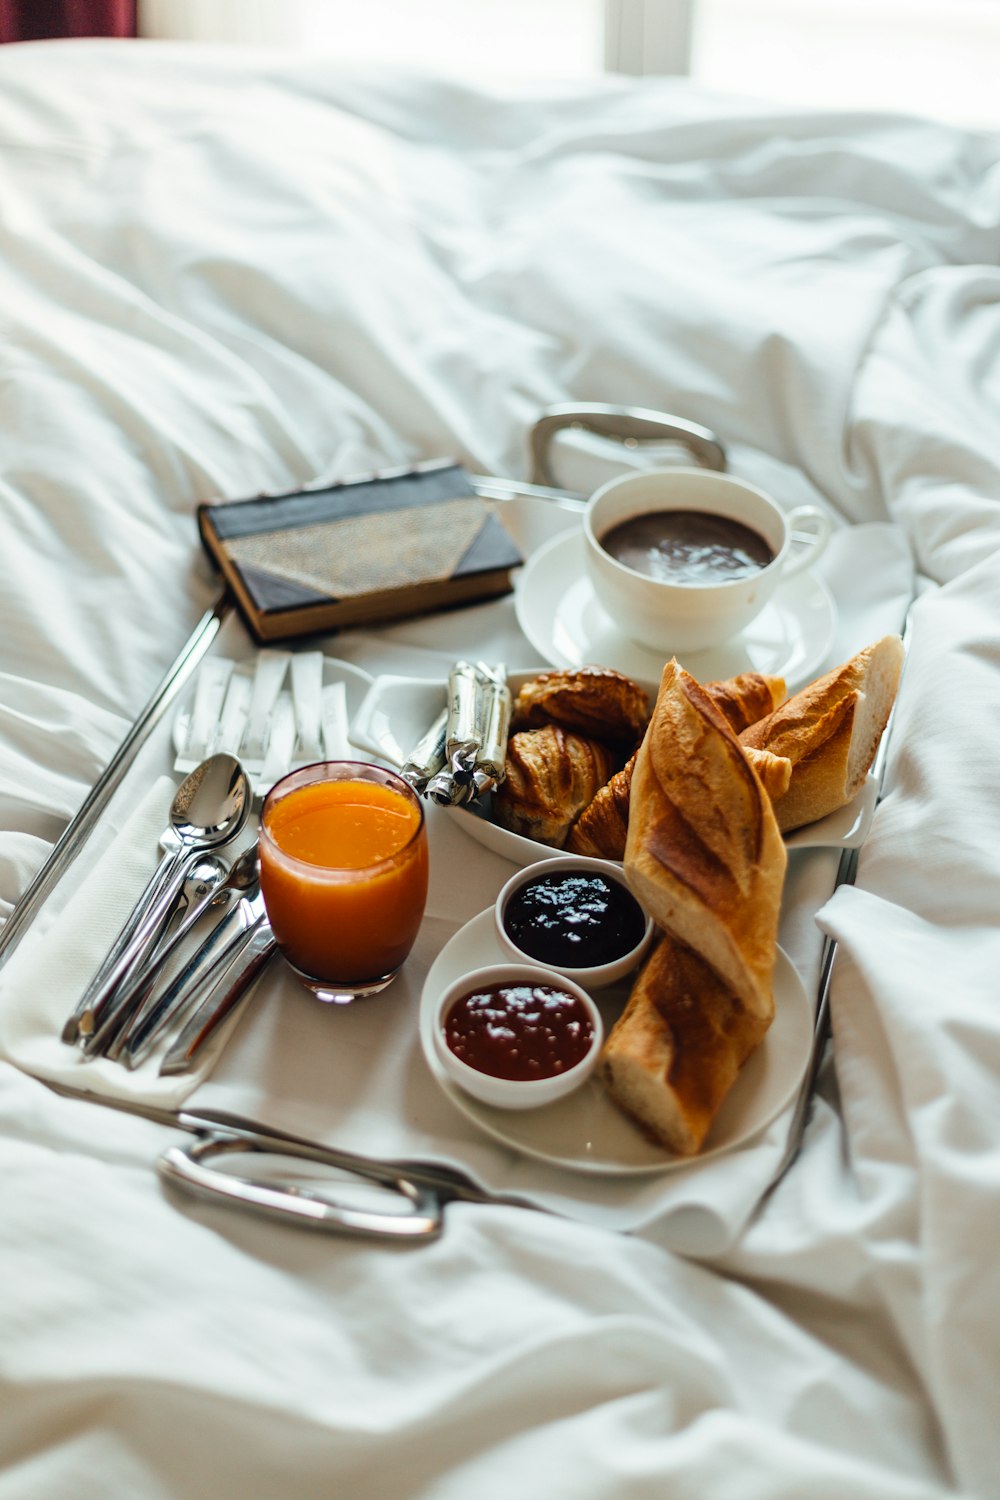 a tray of food on a bed with silverware